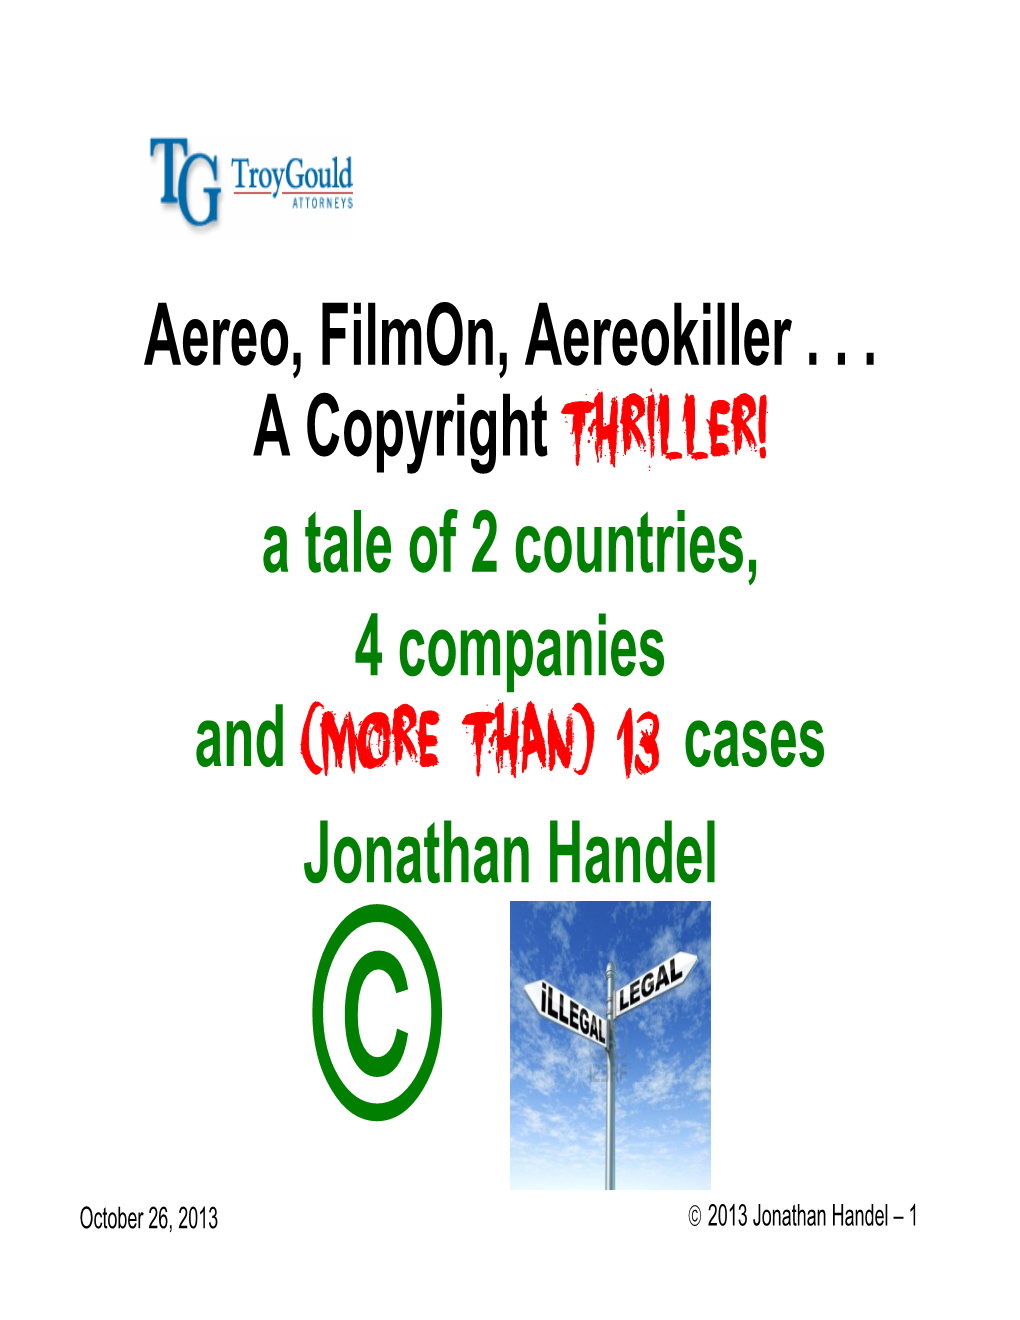 Aereo, Filmon, Aereokiller . . . a Copyright Thriller! a Tale of 2 Countries, 4 Companies and (More Than) 13 Cases Jonathan Handel